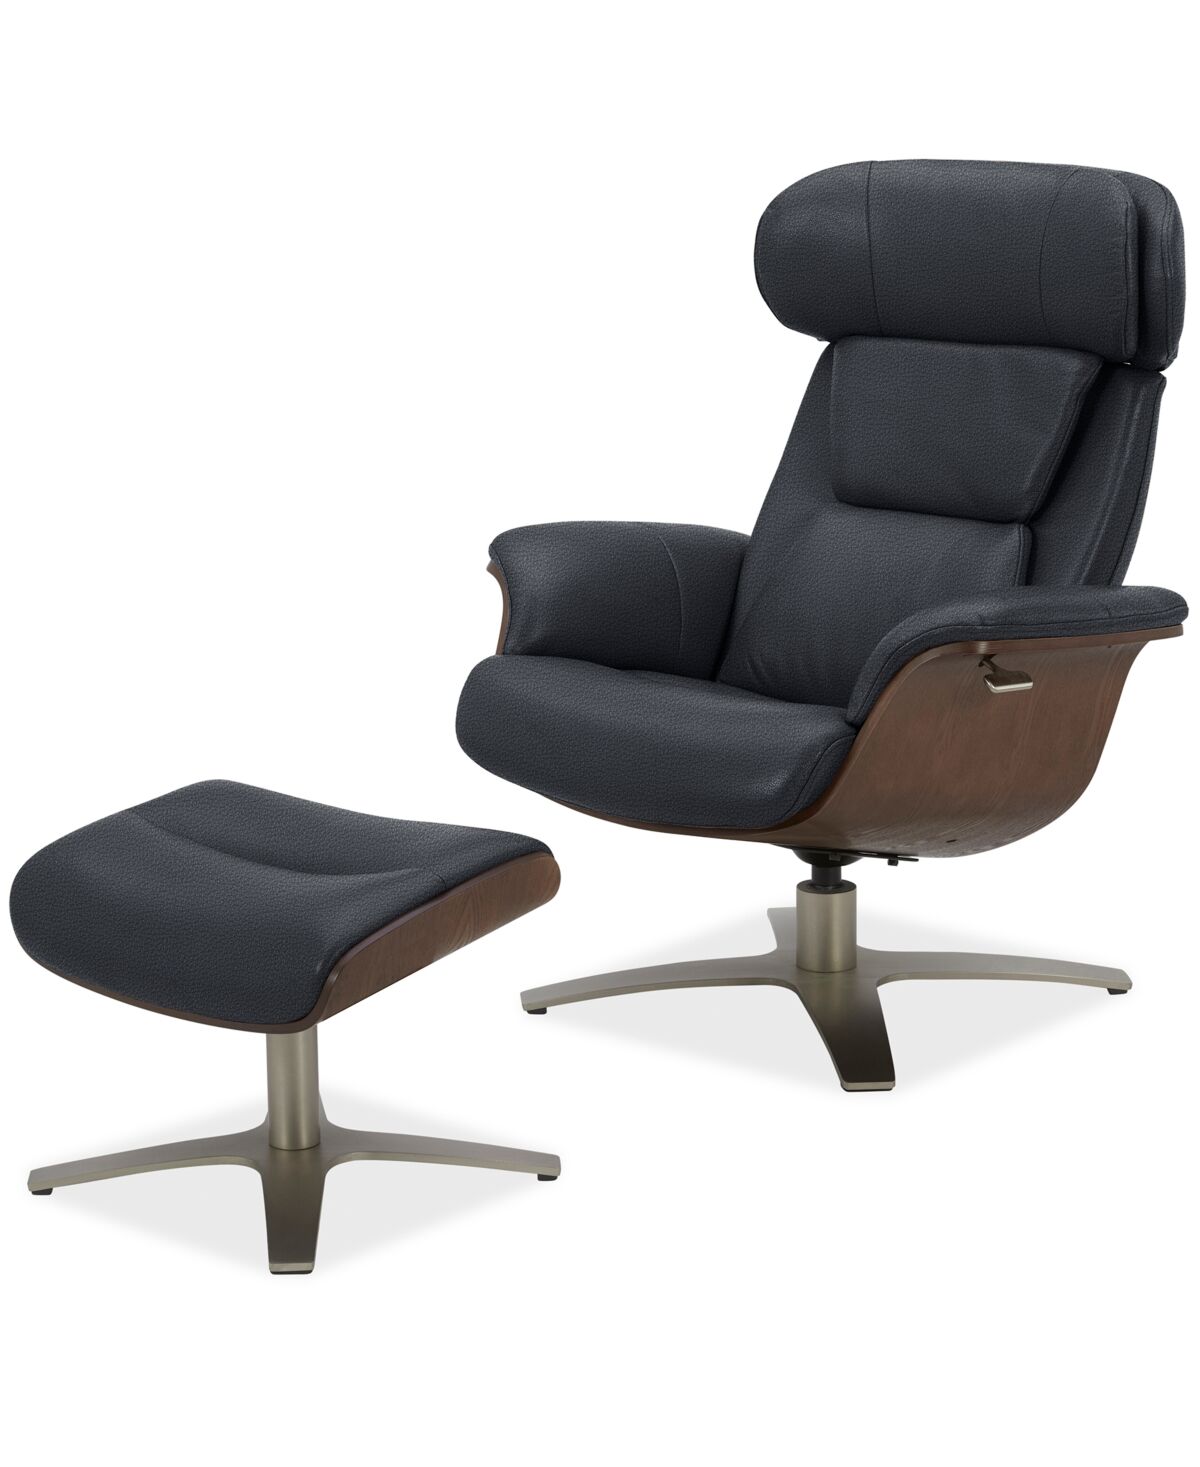 Furniture Janer Leather Swivel Chair & Ottoman Set, Created for Macy's - Black